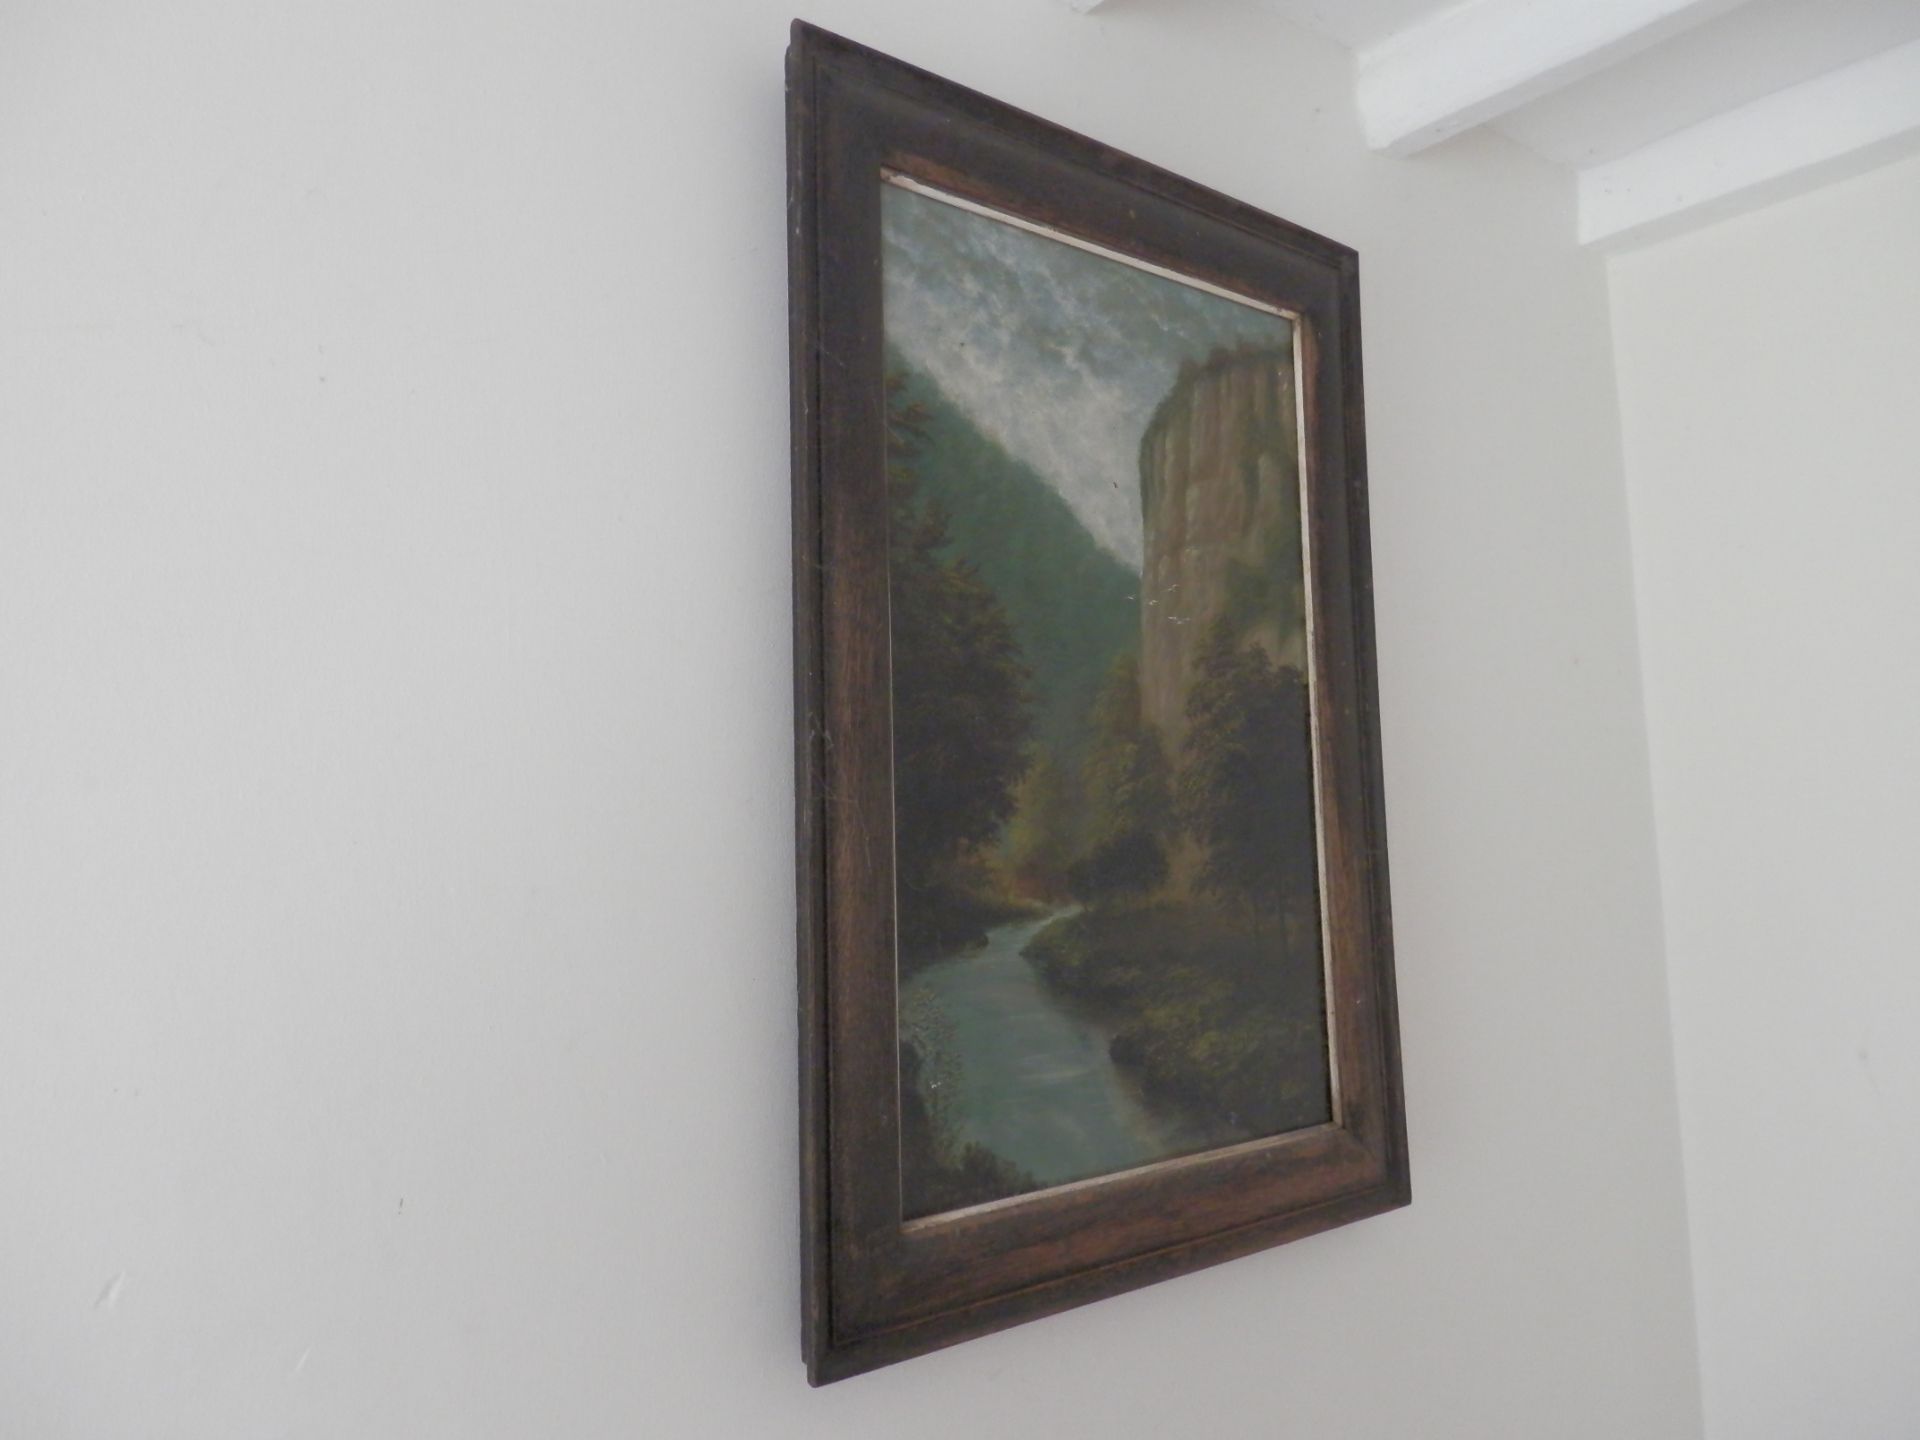 2 x GREAT ANTIQUE OIL PAINTINGS, DERBYSHIRE SCENE, ON CANVAS, DOUBLE FRAMED. - Image 4 of 8